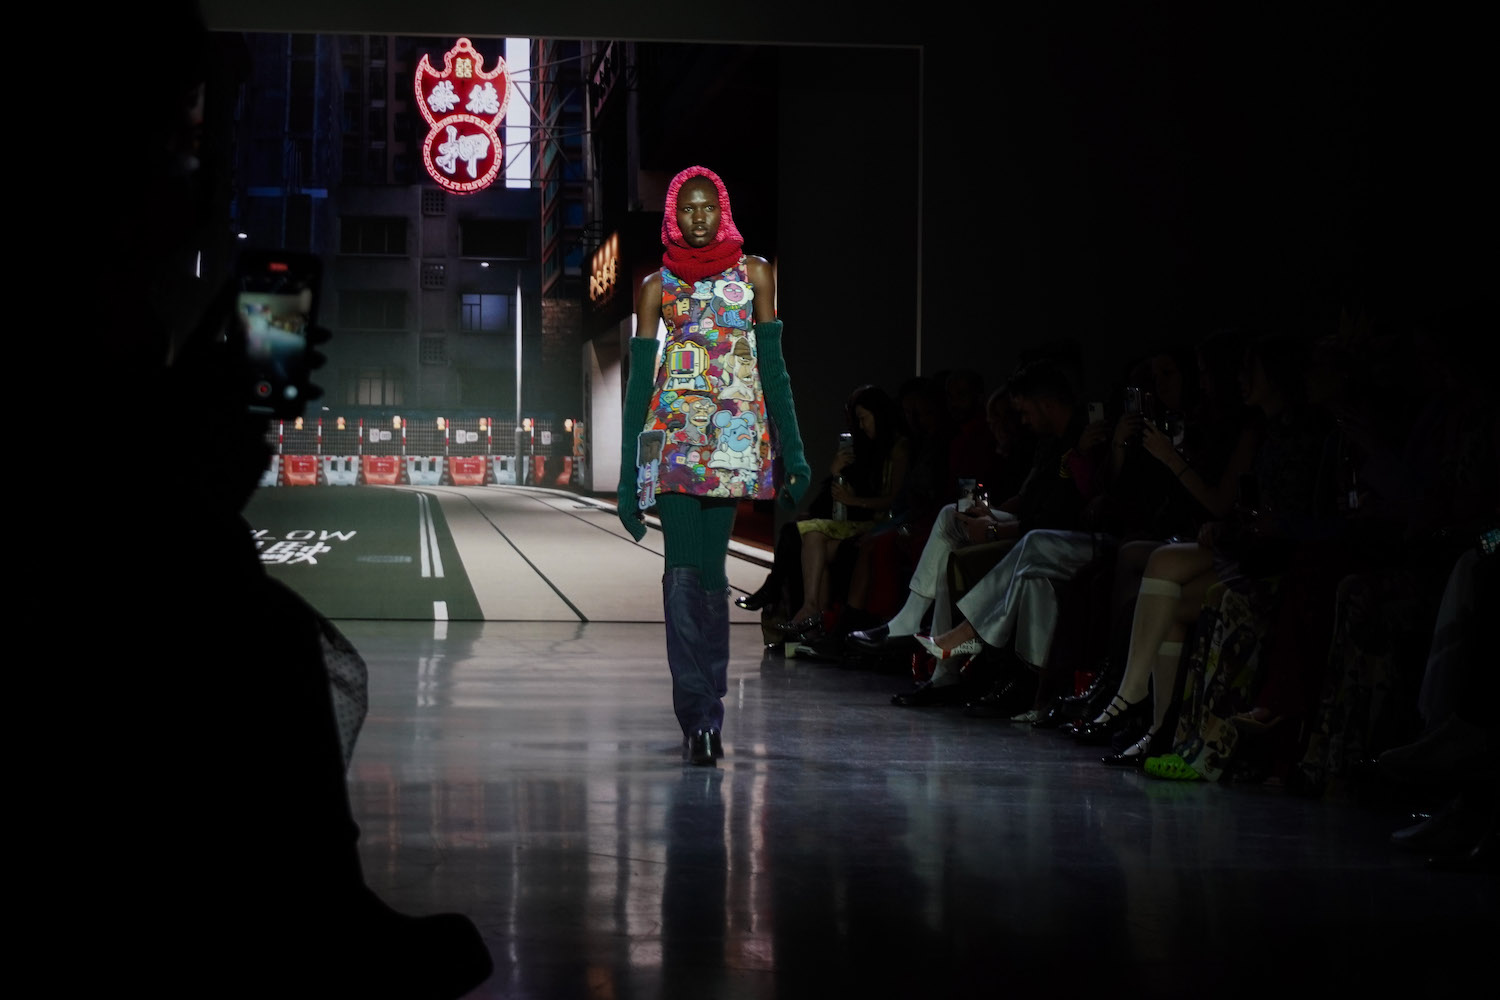 The opening model of the show walks down the runway in dim lighting against the TAMverse backdrop with a dress decorated with N.F.T.s, green leggings and arm warmers, pink and red sleeves, and tall boots.